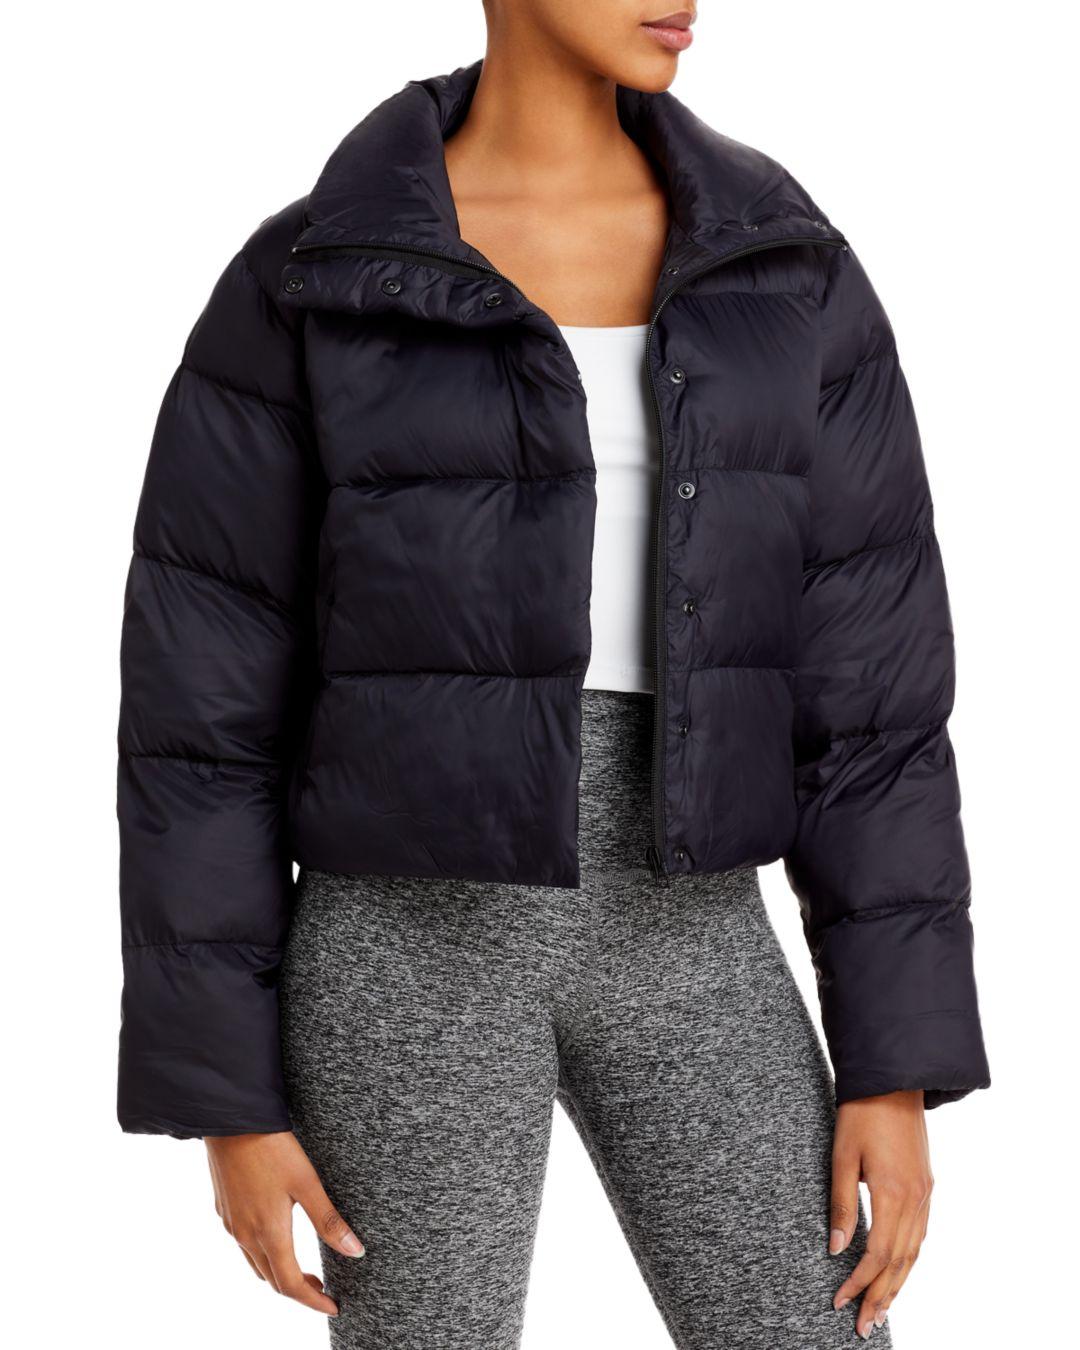 Alo Yoga Synthetic Gold Rush Puffer Jacket in Black - Lyst